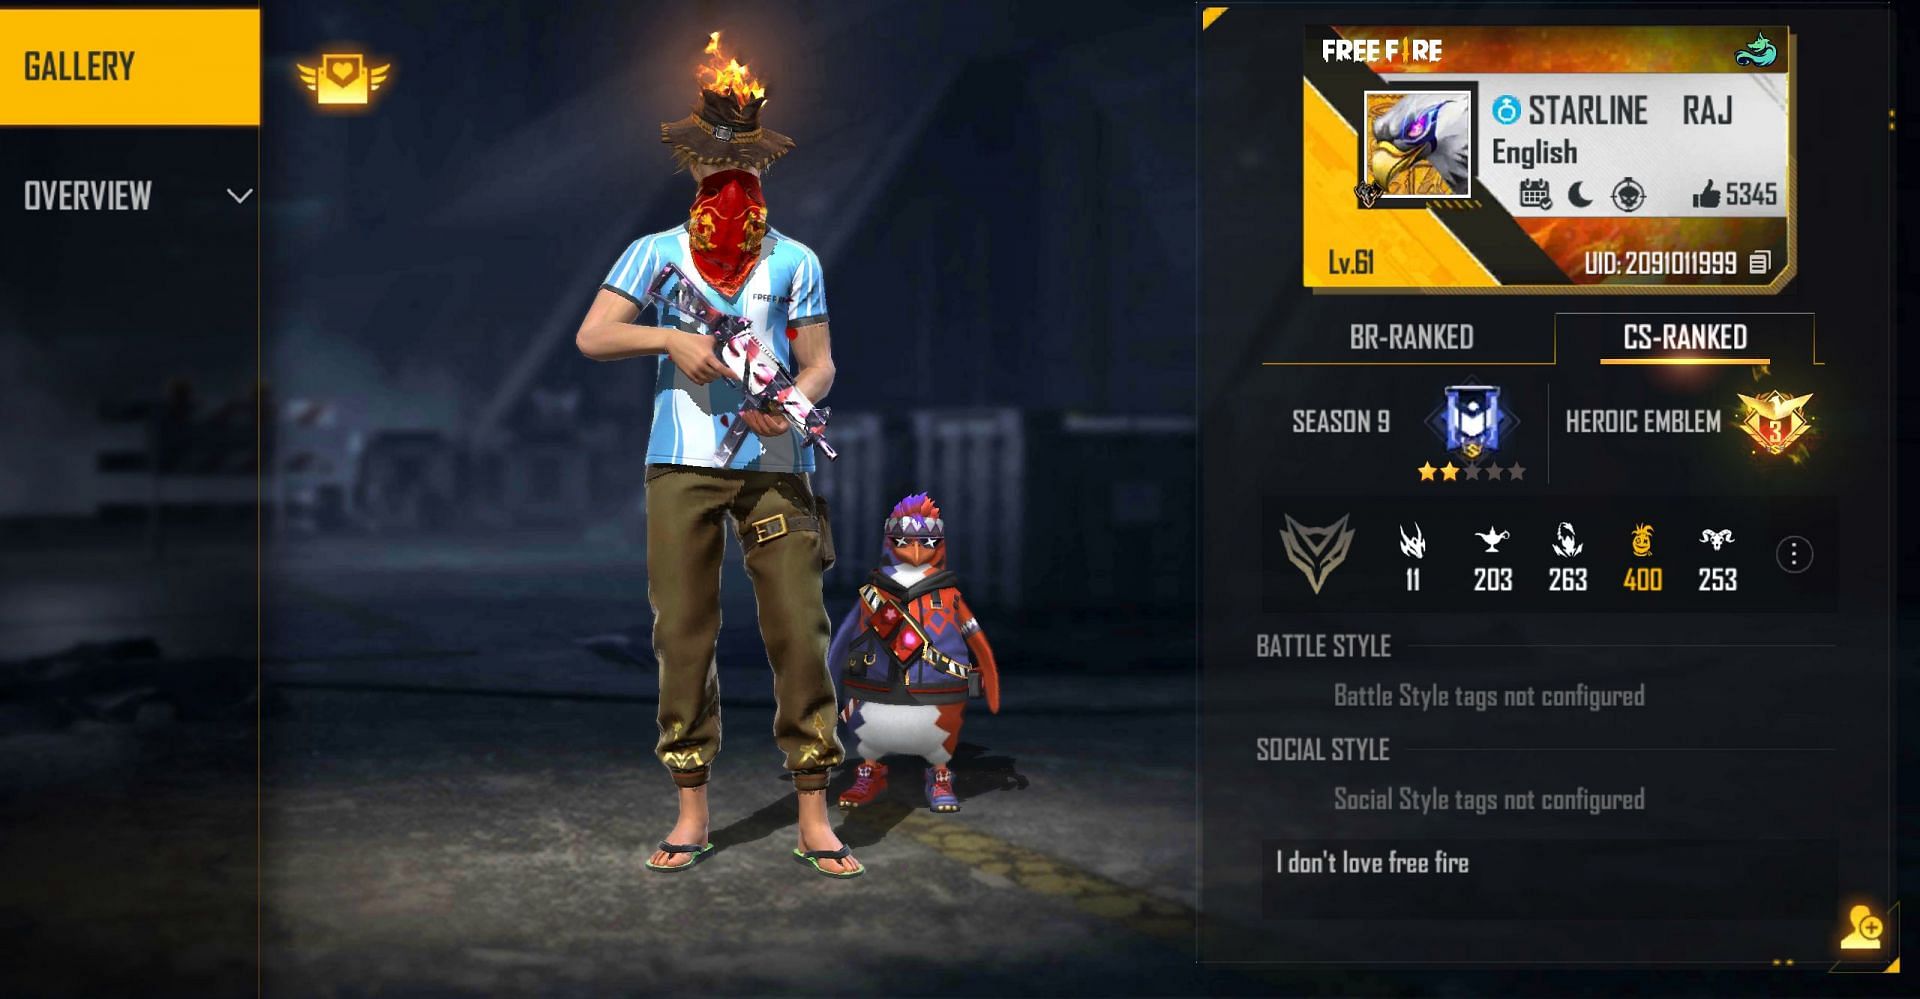 This is the Free Fire ID of Starline Raj (Image via Free Fire)